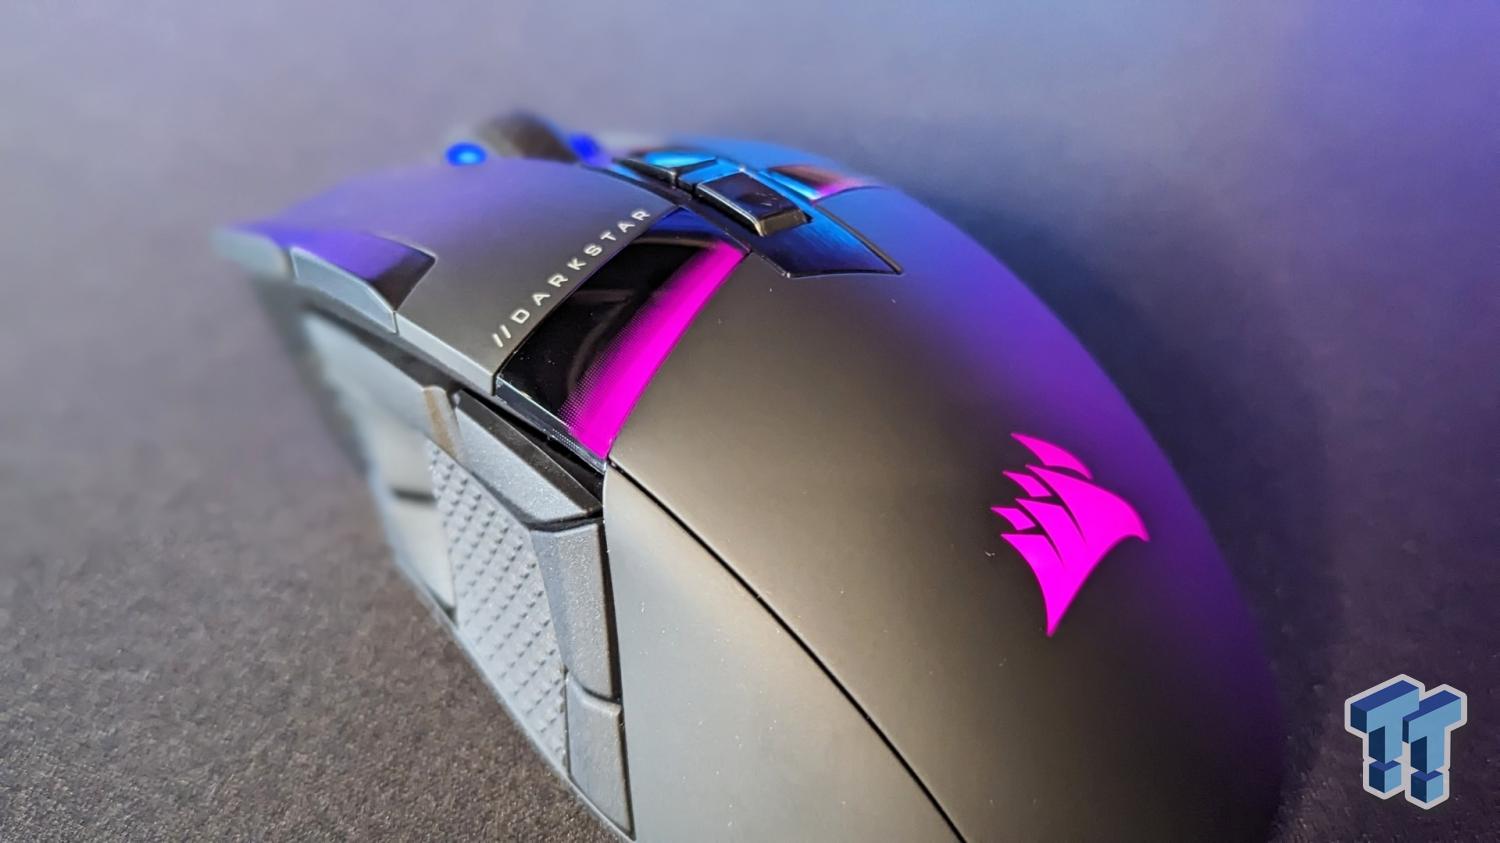  ENDGAME GEAR XM2we Wireless Gaming Mouse, Programmable